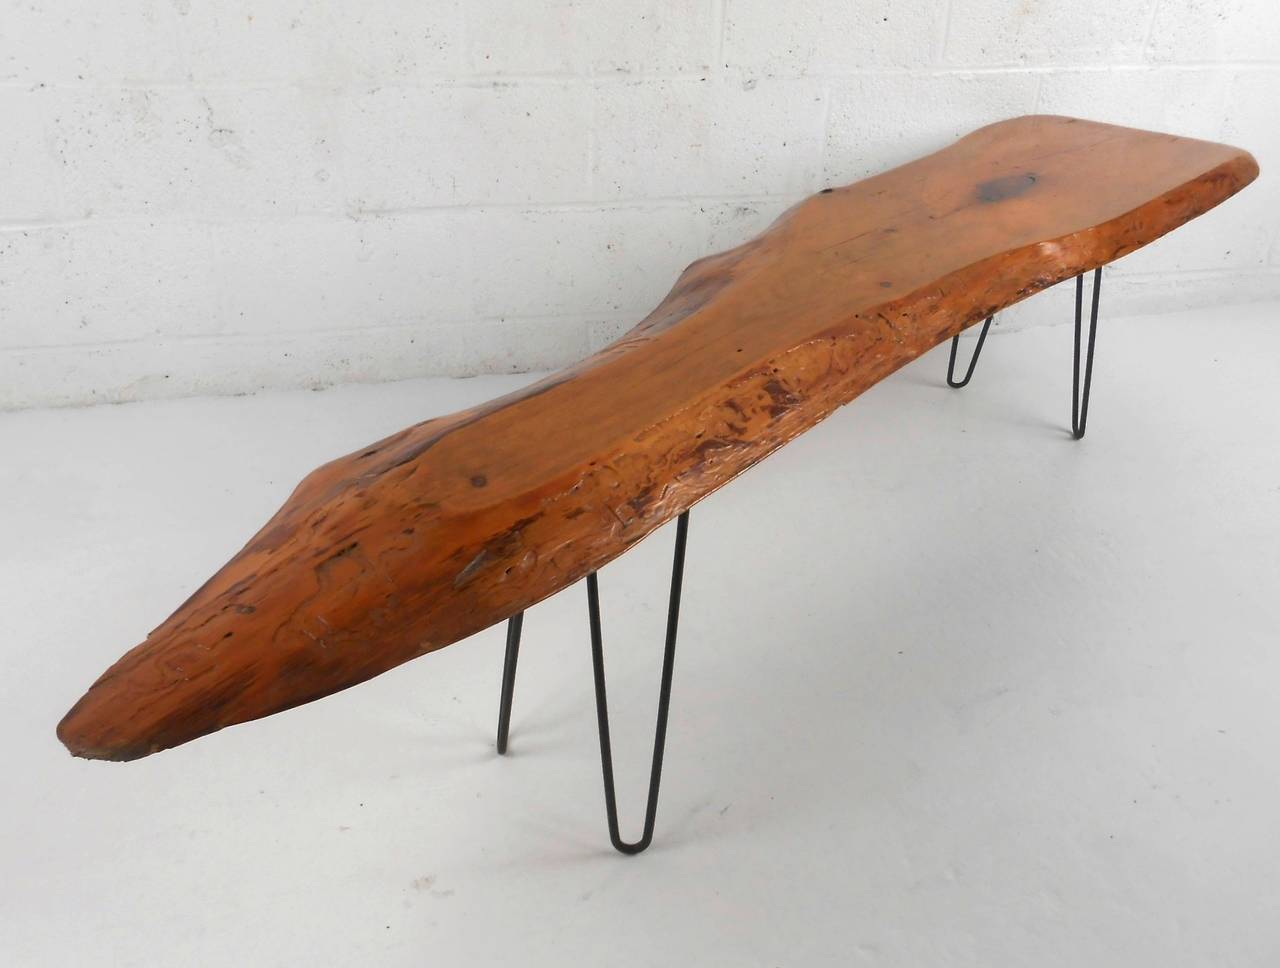 This unique freeform coffee table makes a wonderful addition any rustic or modern interior. Stylish hairpin legs compliment this unique slab top table, signed by creator but illegible. This lovely mid-century live edge coffee table makes the perfect